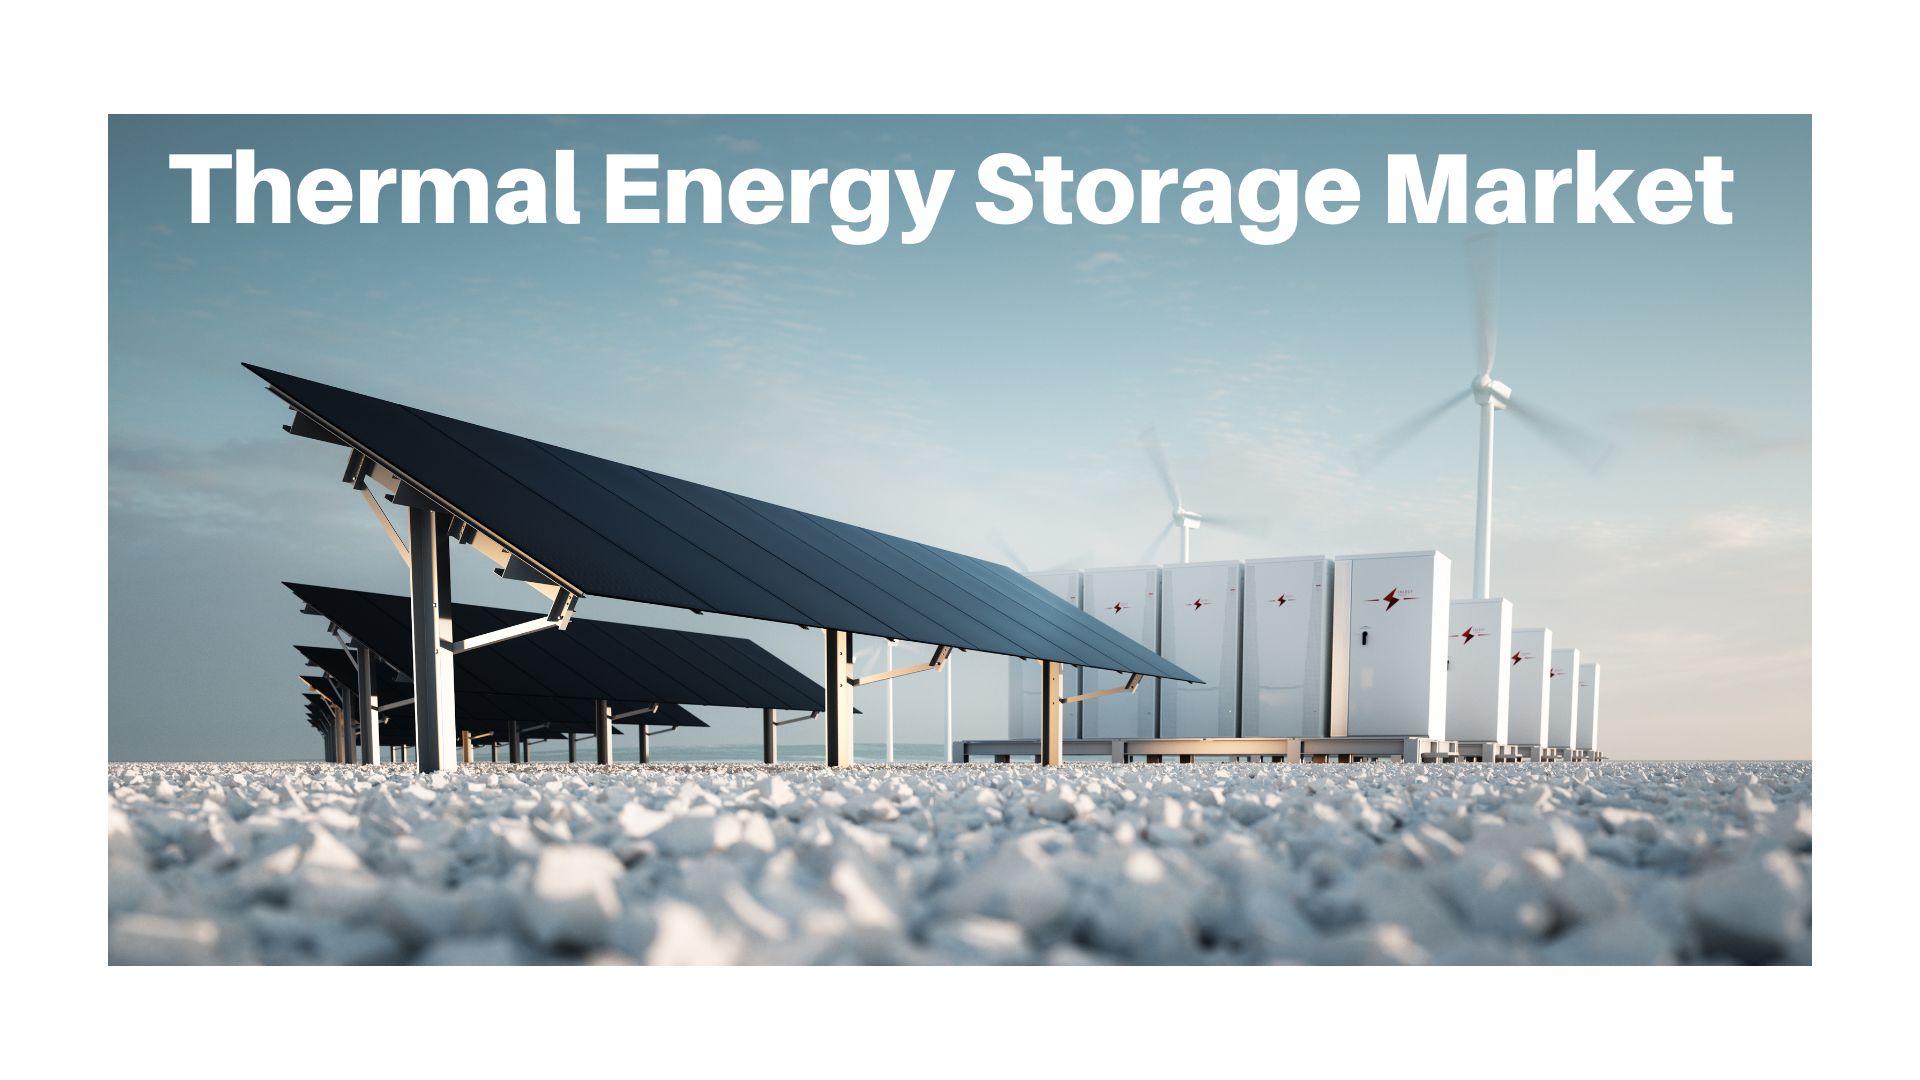 Thermal Energy Storage Market Size Expected Reach 13.96 Bn By 2032